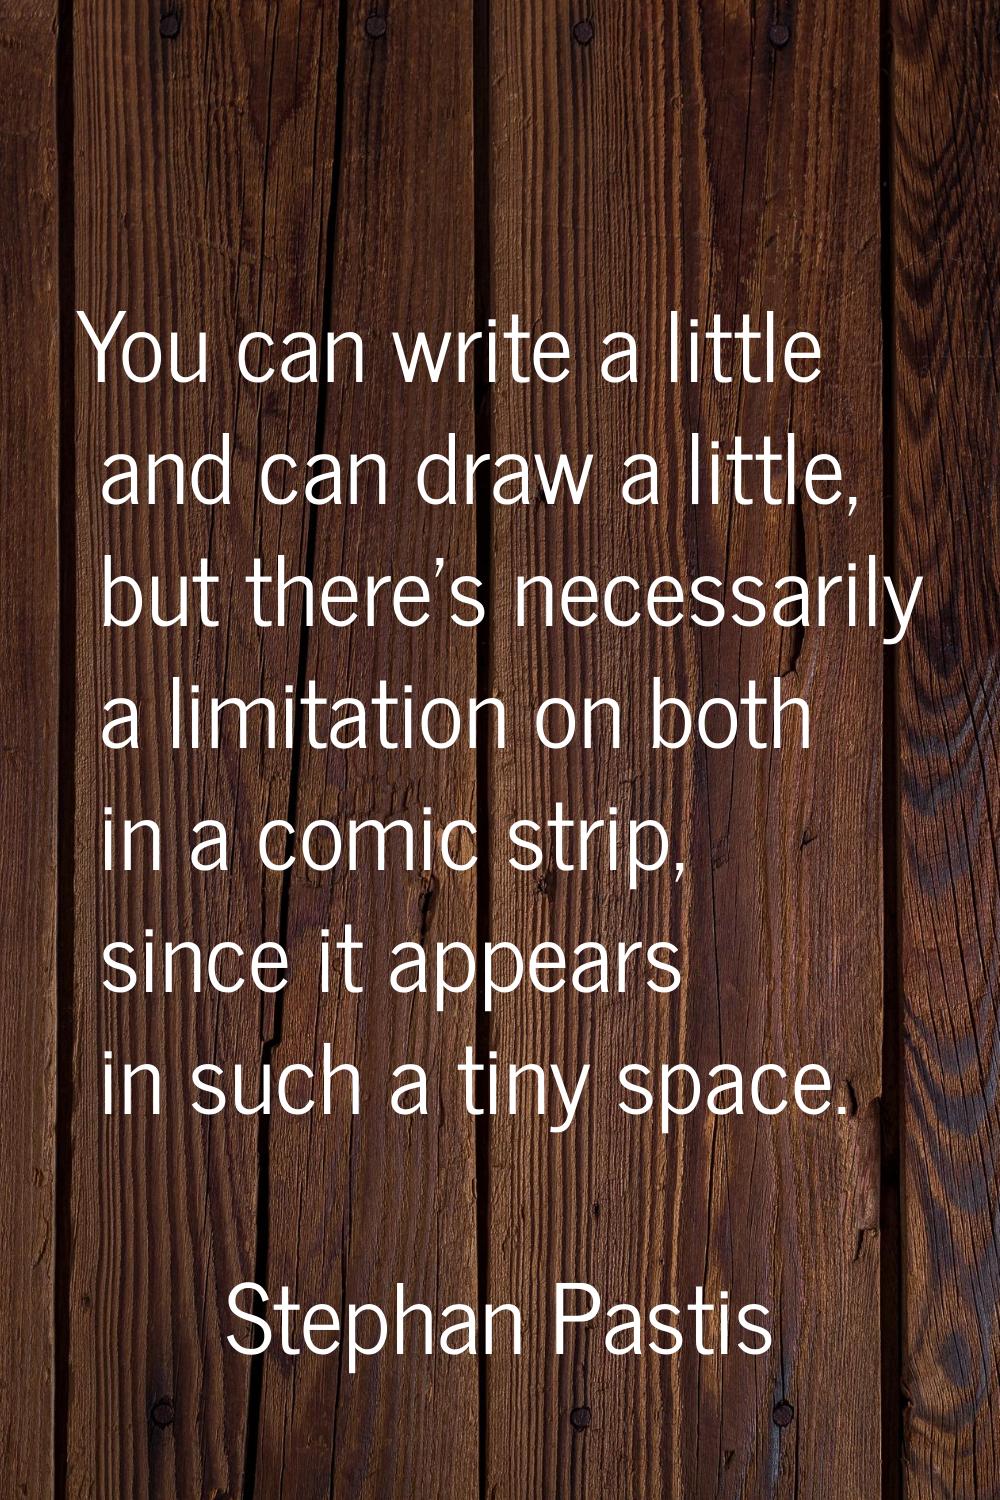 You can write a little and can draw a little, but there's necessarily a limitation on both in a com